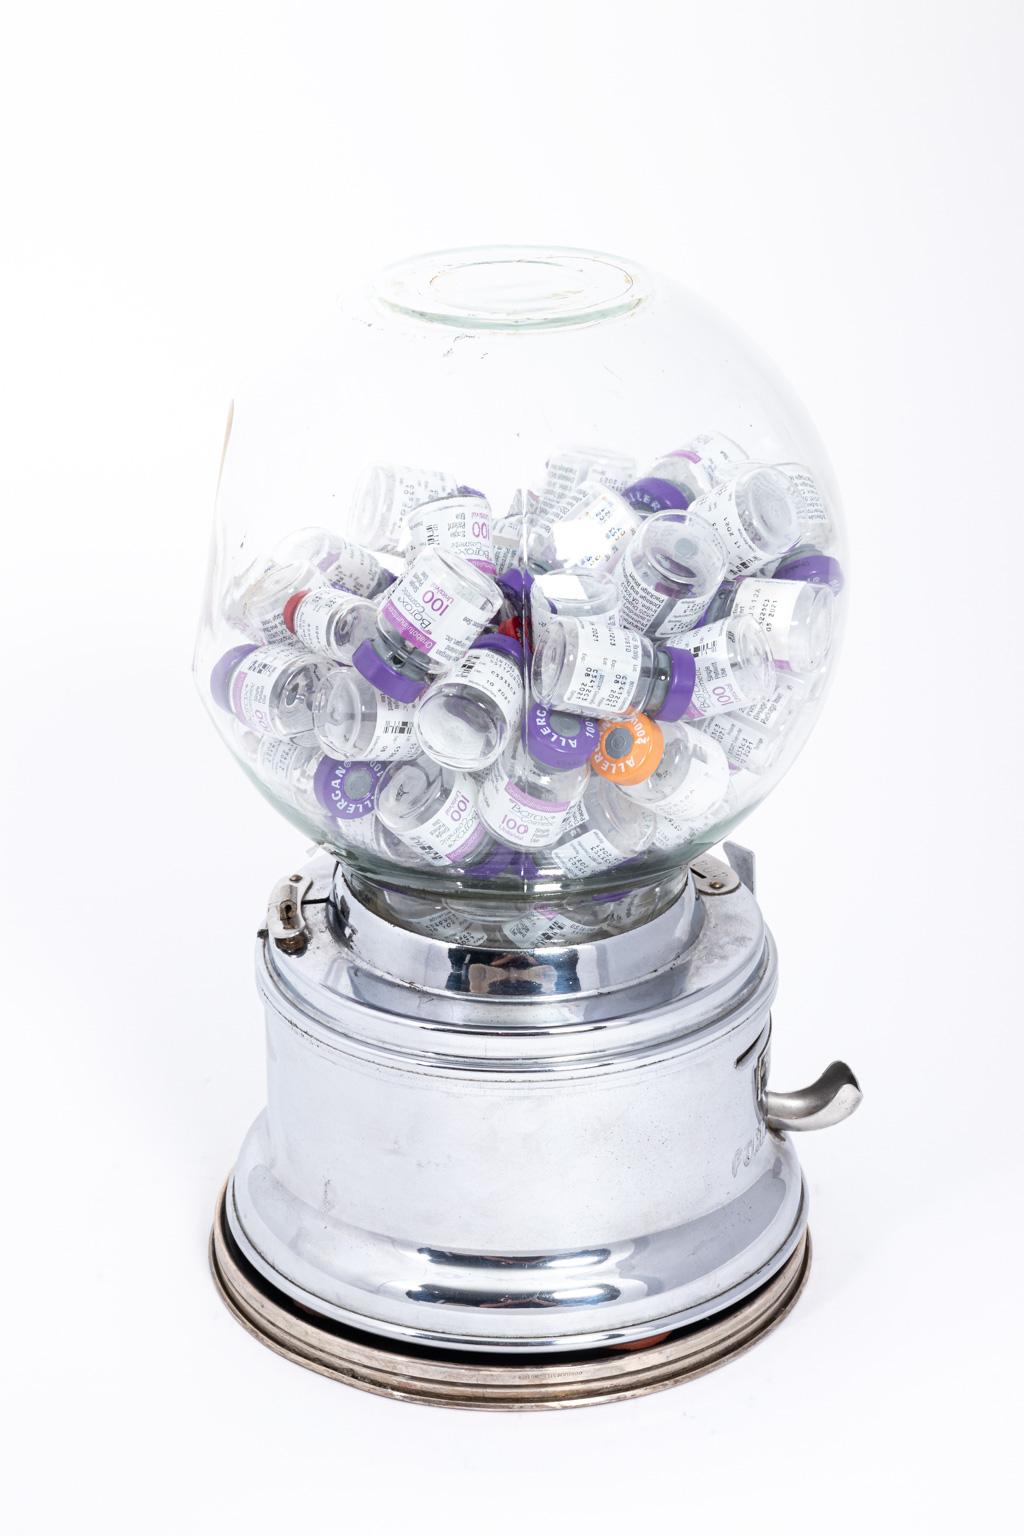 Vintage 1960s Gumball machine filled with empty Botox containers. Art piece, complete with key. Glass circumference is 24.00 inches.